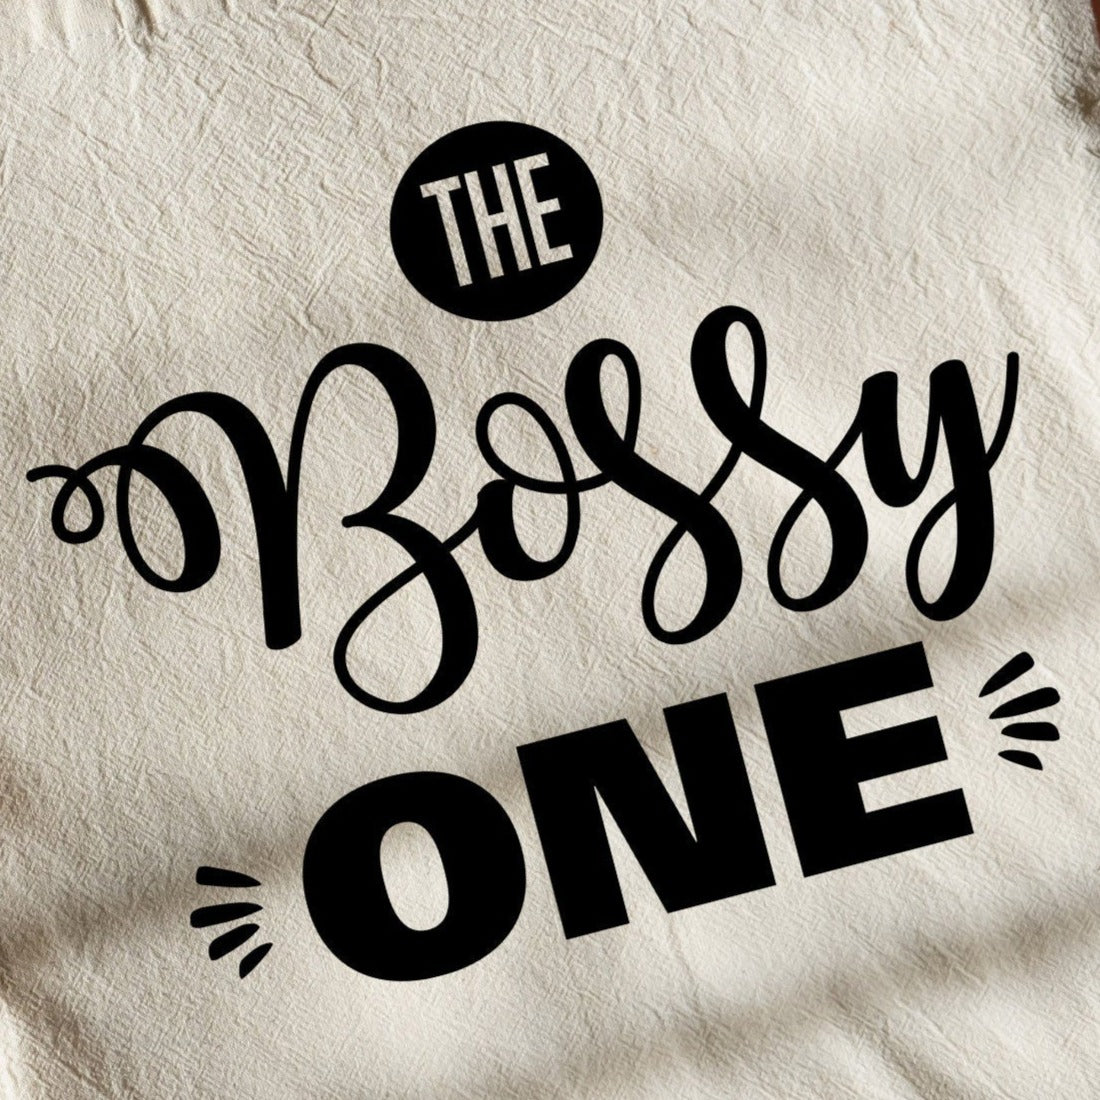 The Bossy One